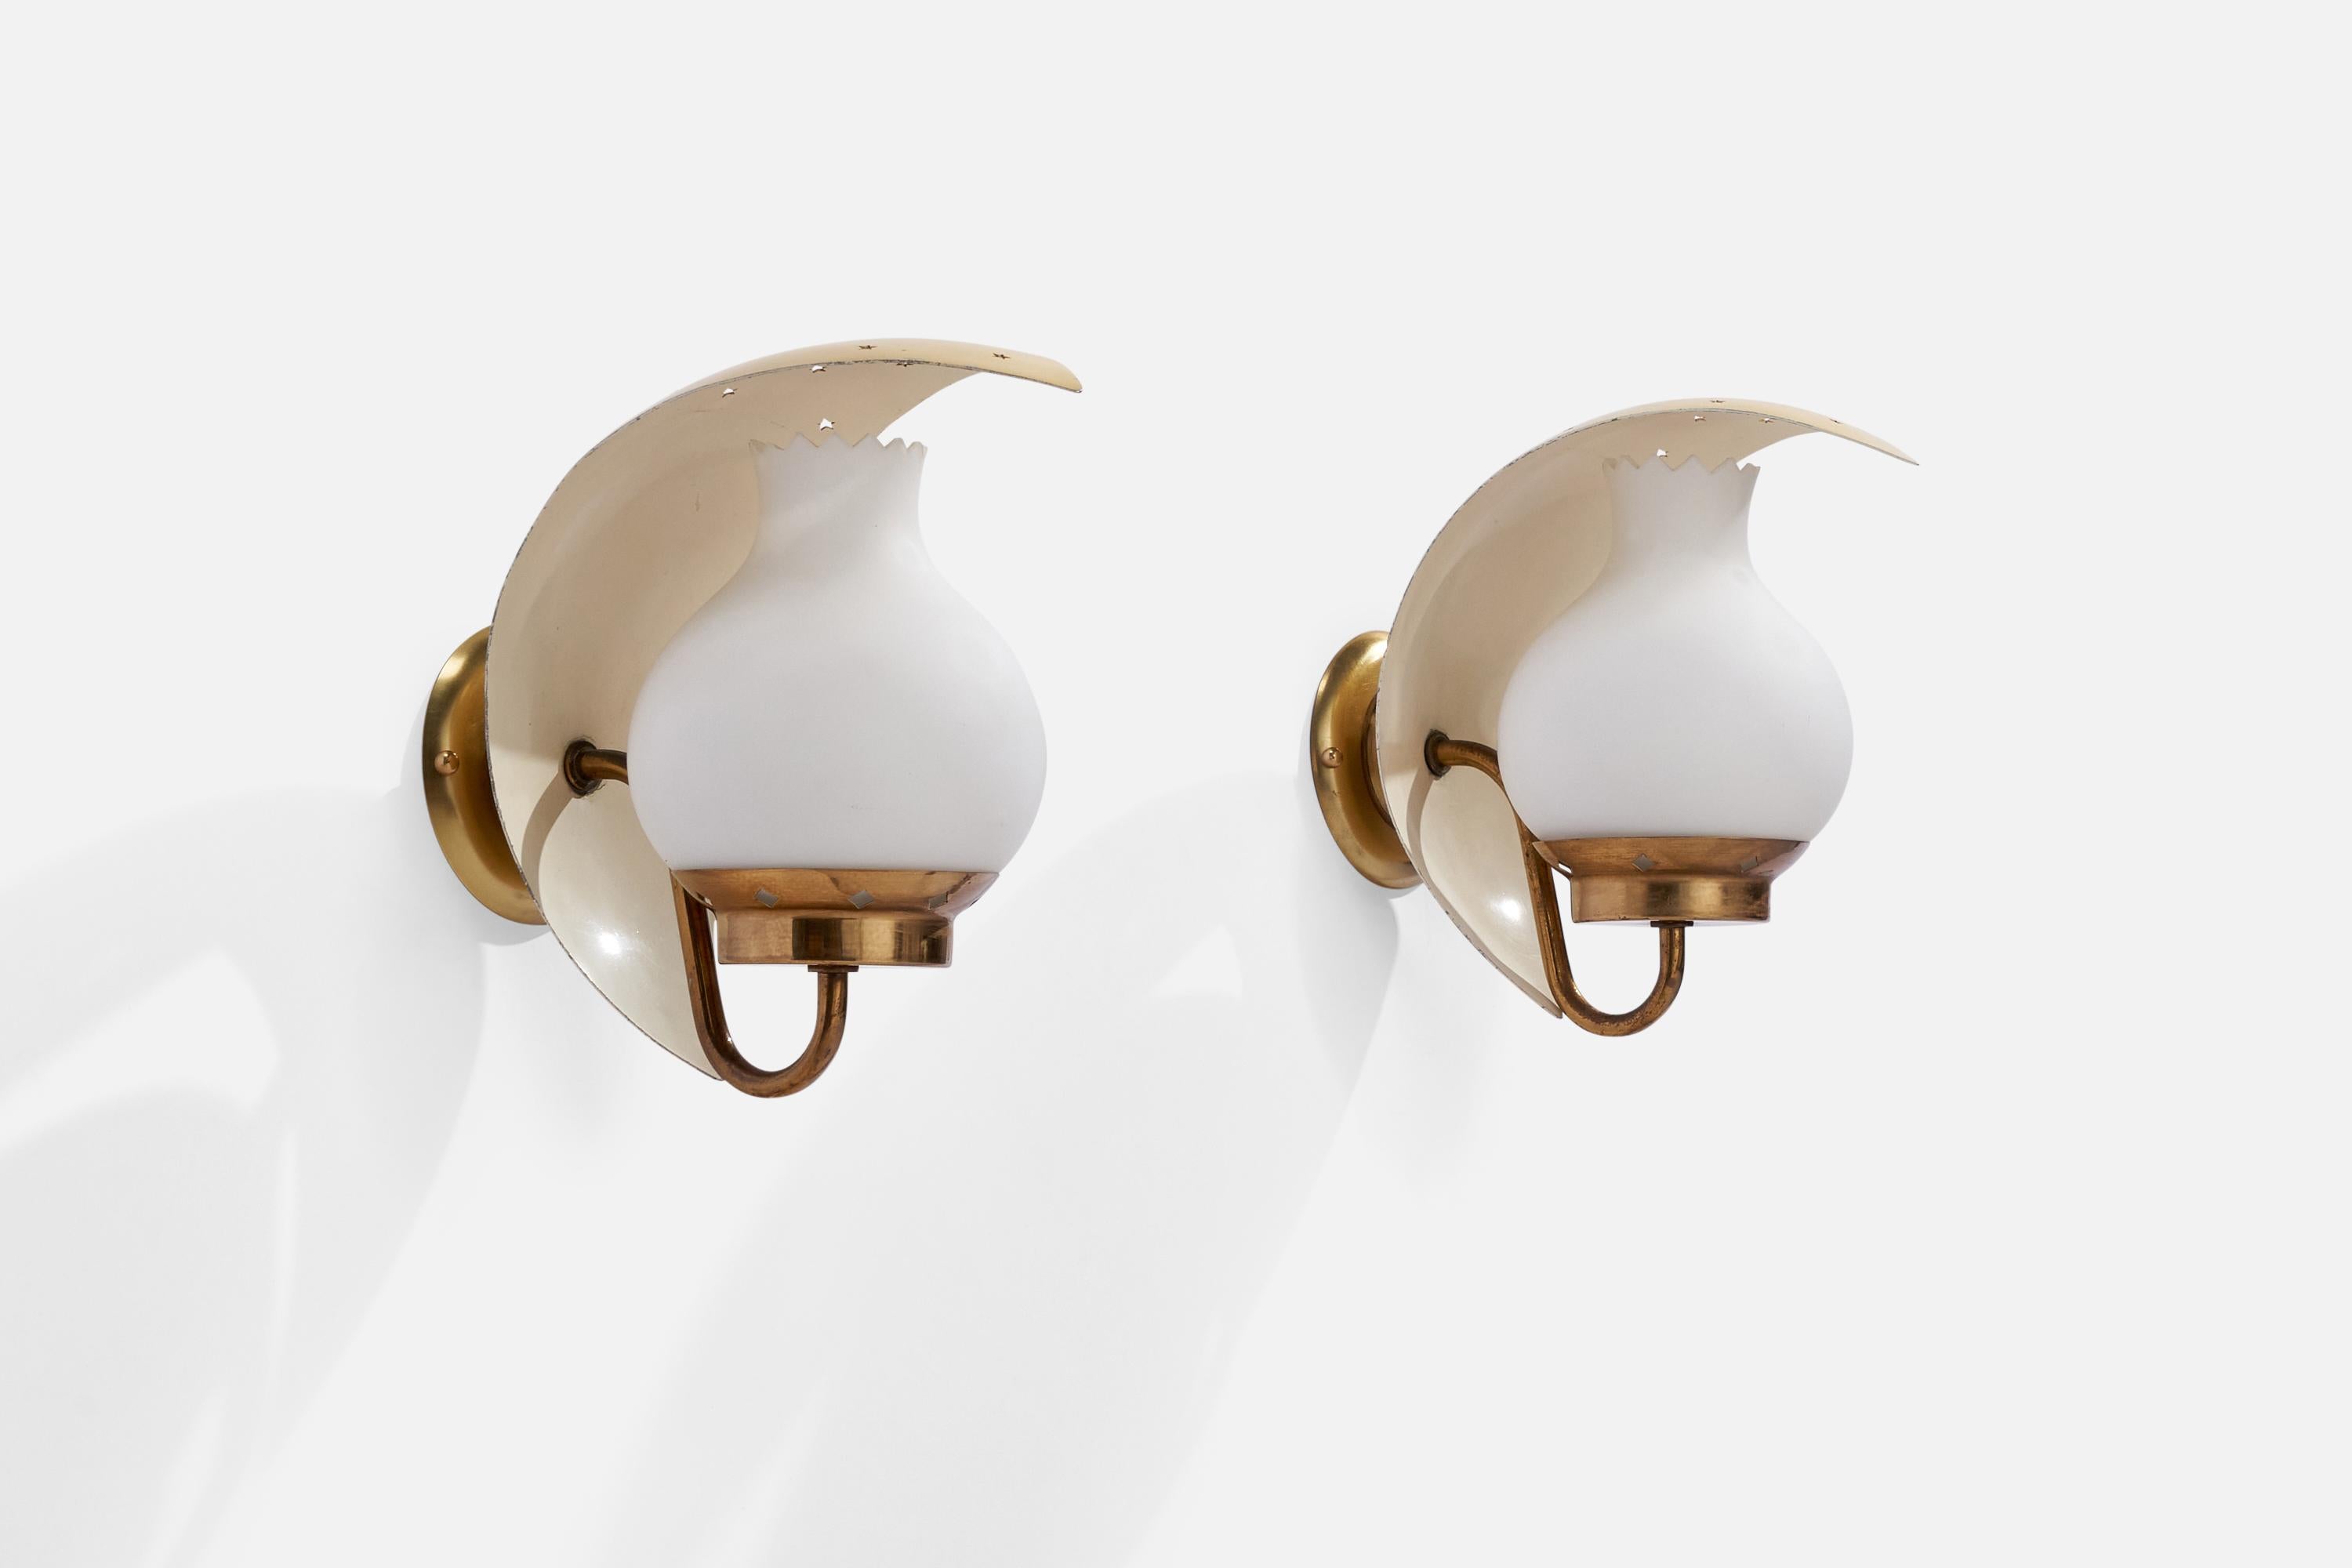 A pair of brass, yellow beige lacquered metal and opaline glass wall lights designed by Bent Karlby and produced by Lyfa, Denmark, 1960s.

Overall Dimensions (inches): 8”  H x 5” W x 9” D
Back Plate Dimensions (inches): 3.75” H x 3.75” W x .75”